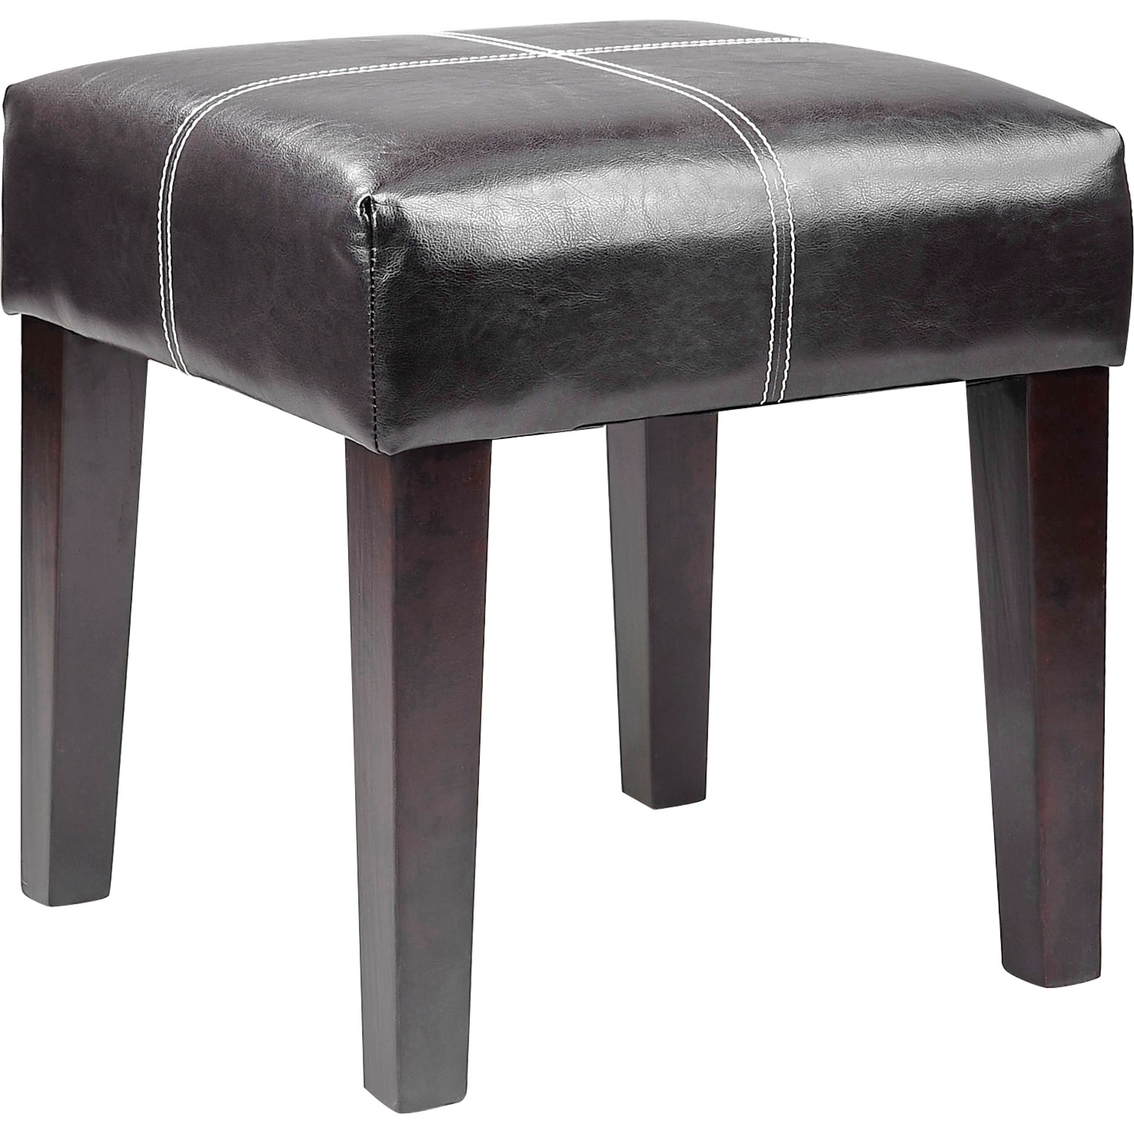 CorLiving Antonio 16 in. Square Bonded Leather Bench - Image 2 of 3